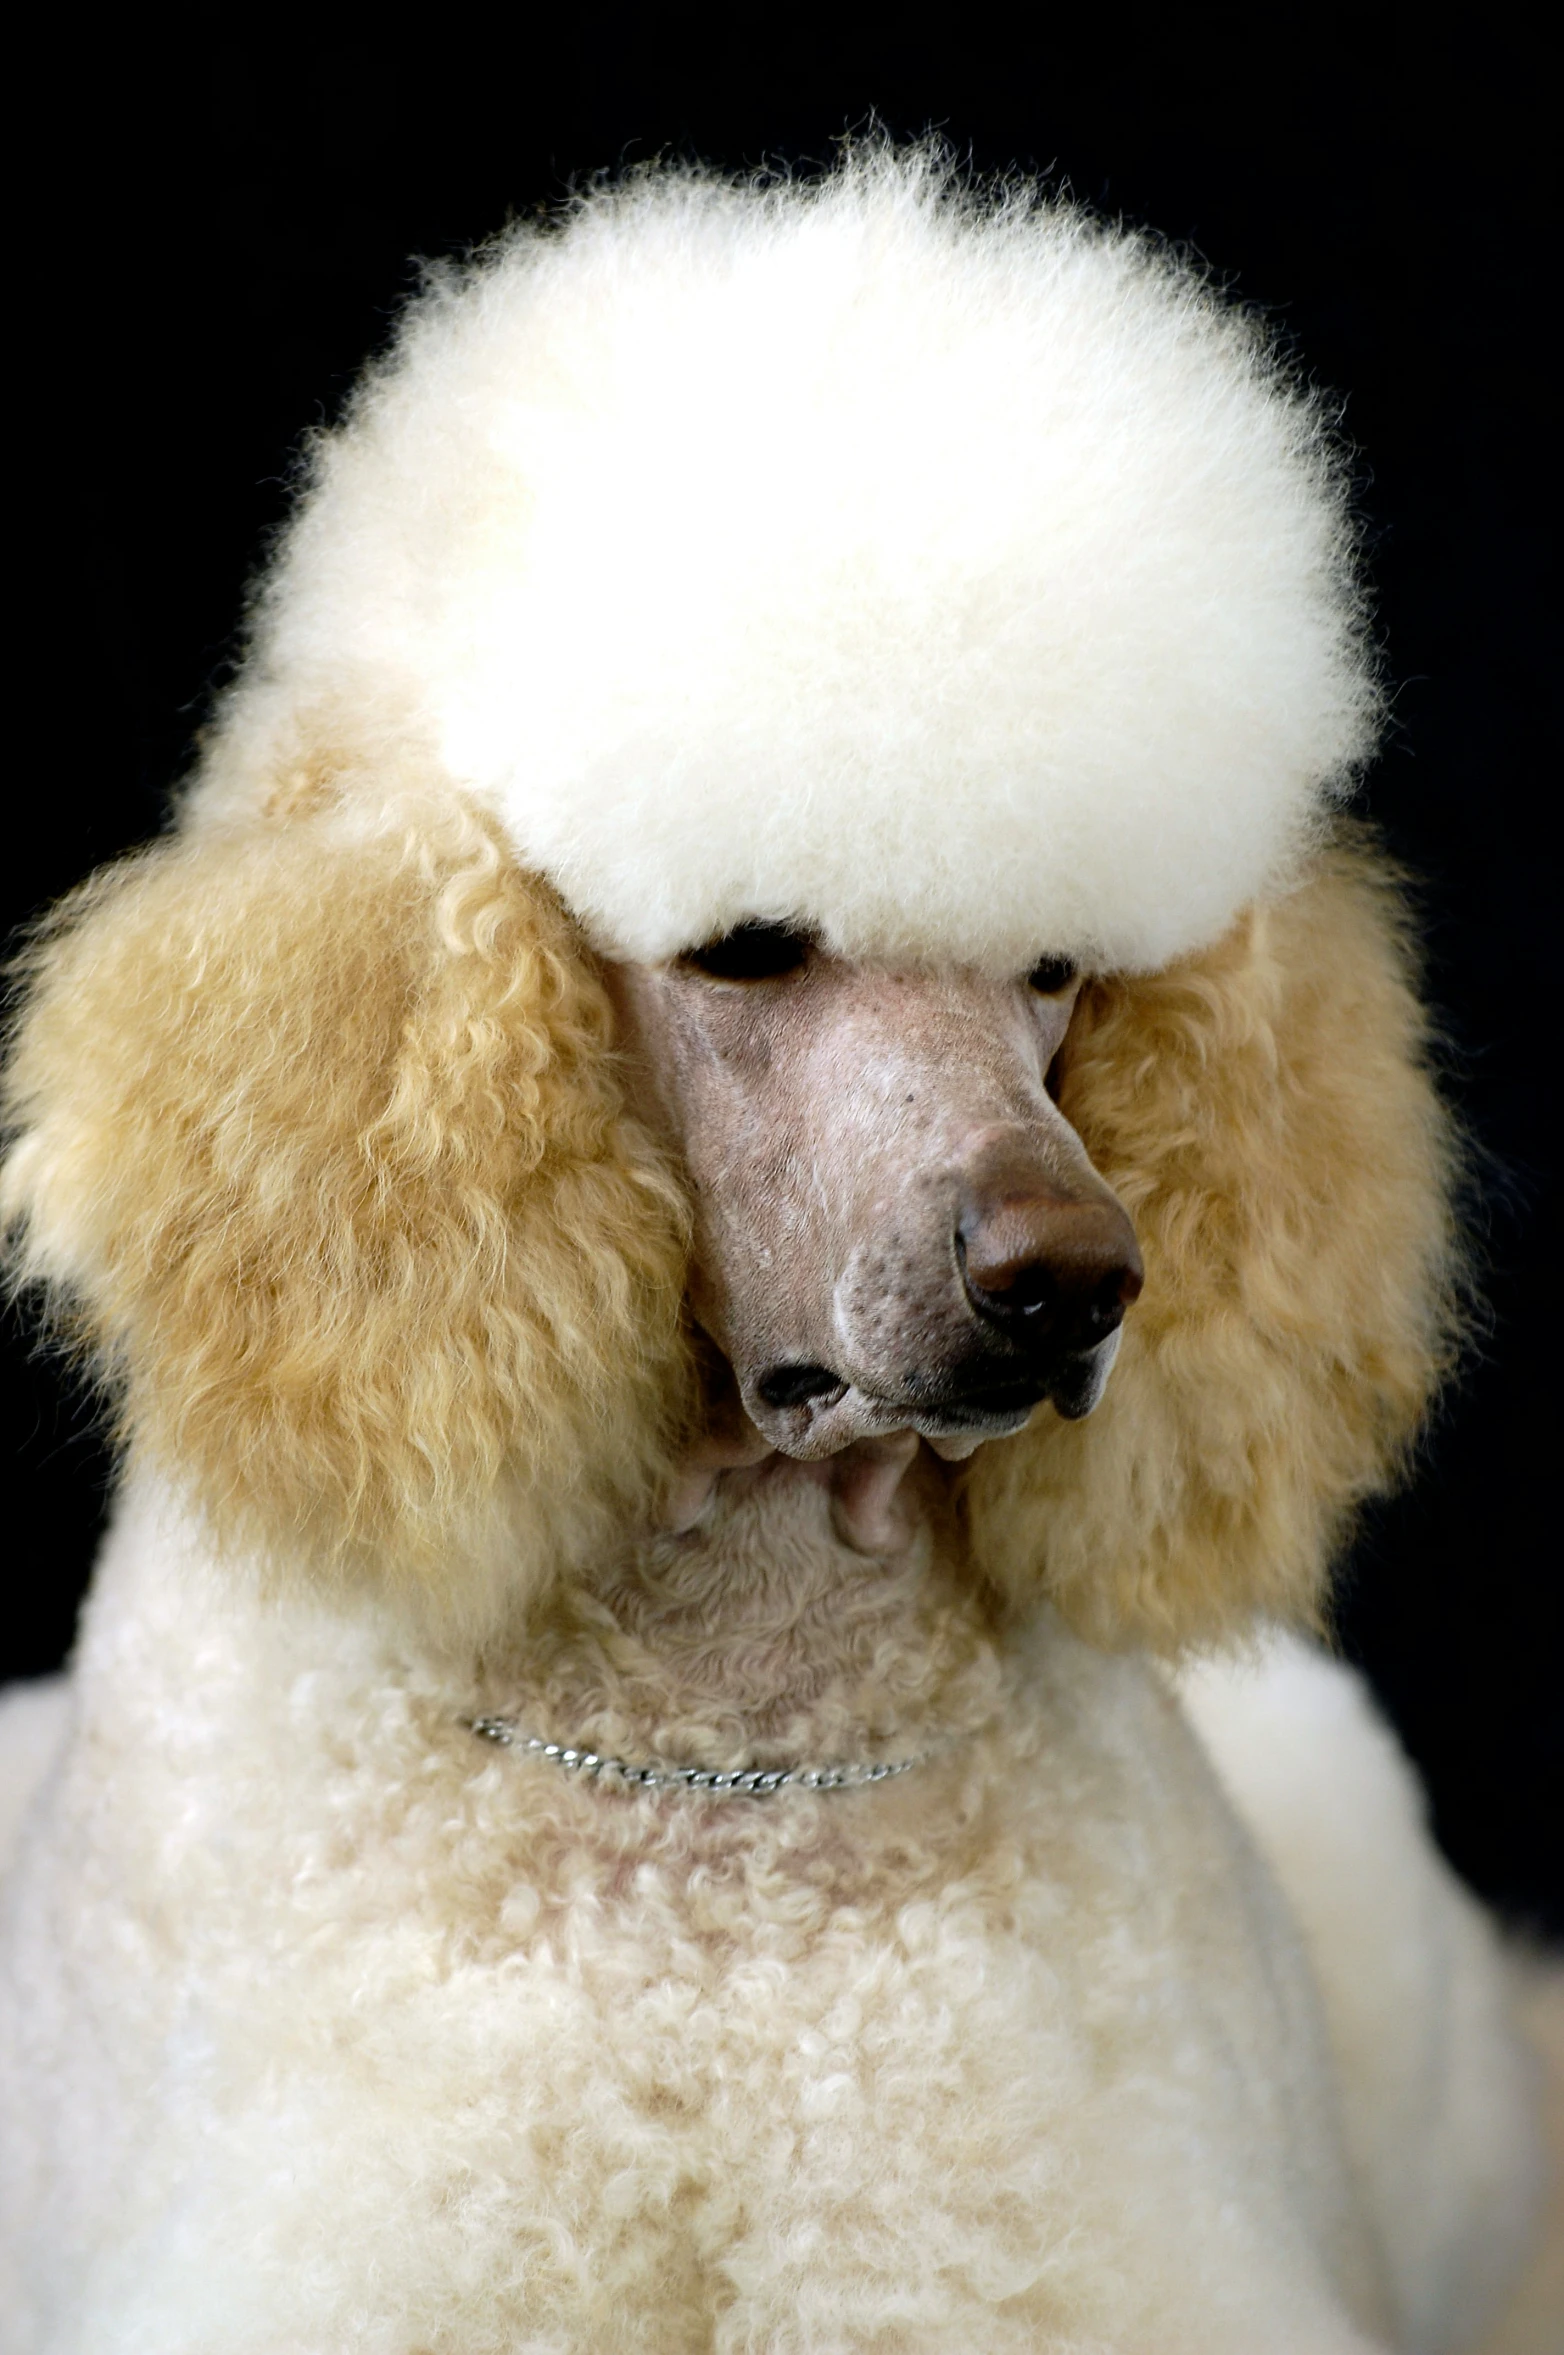 a poodle with a very short head is pictured in this image